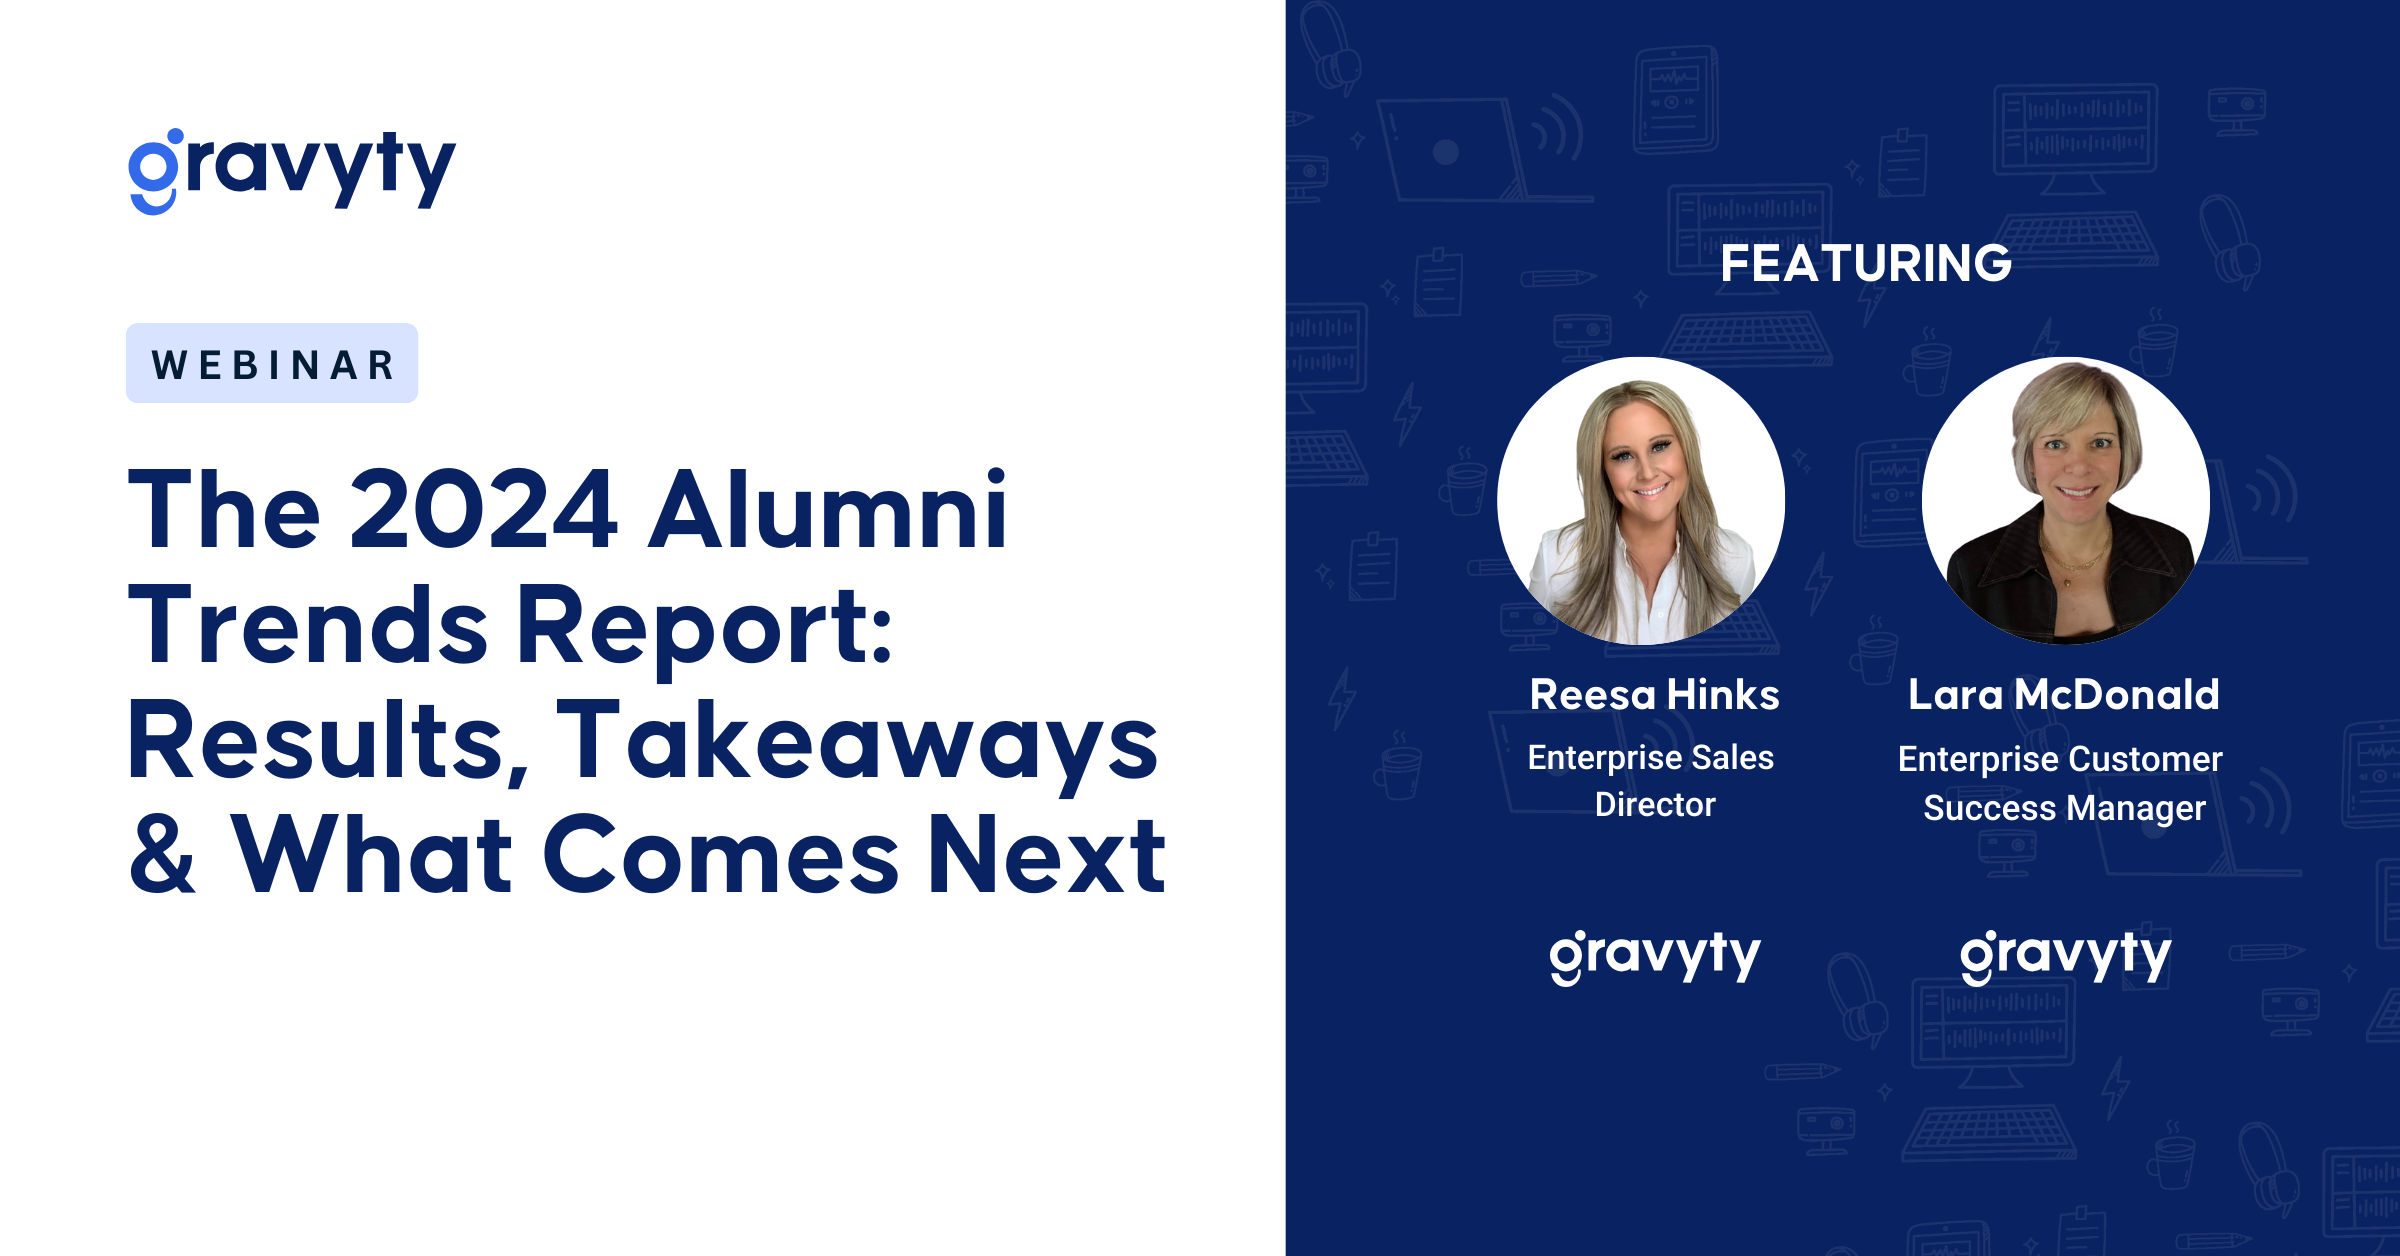 The 2024 Alumni Trends Report: Results, Takeaways & What Comes Next